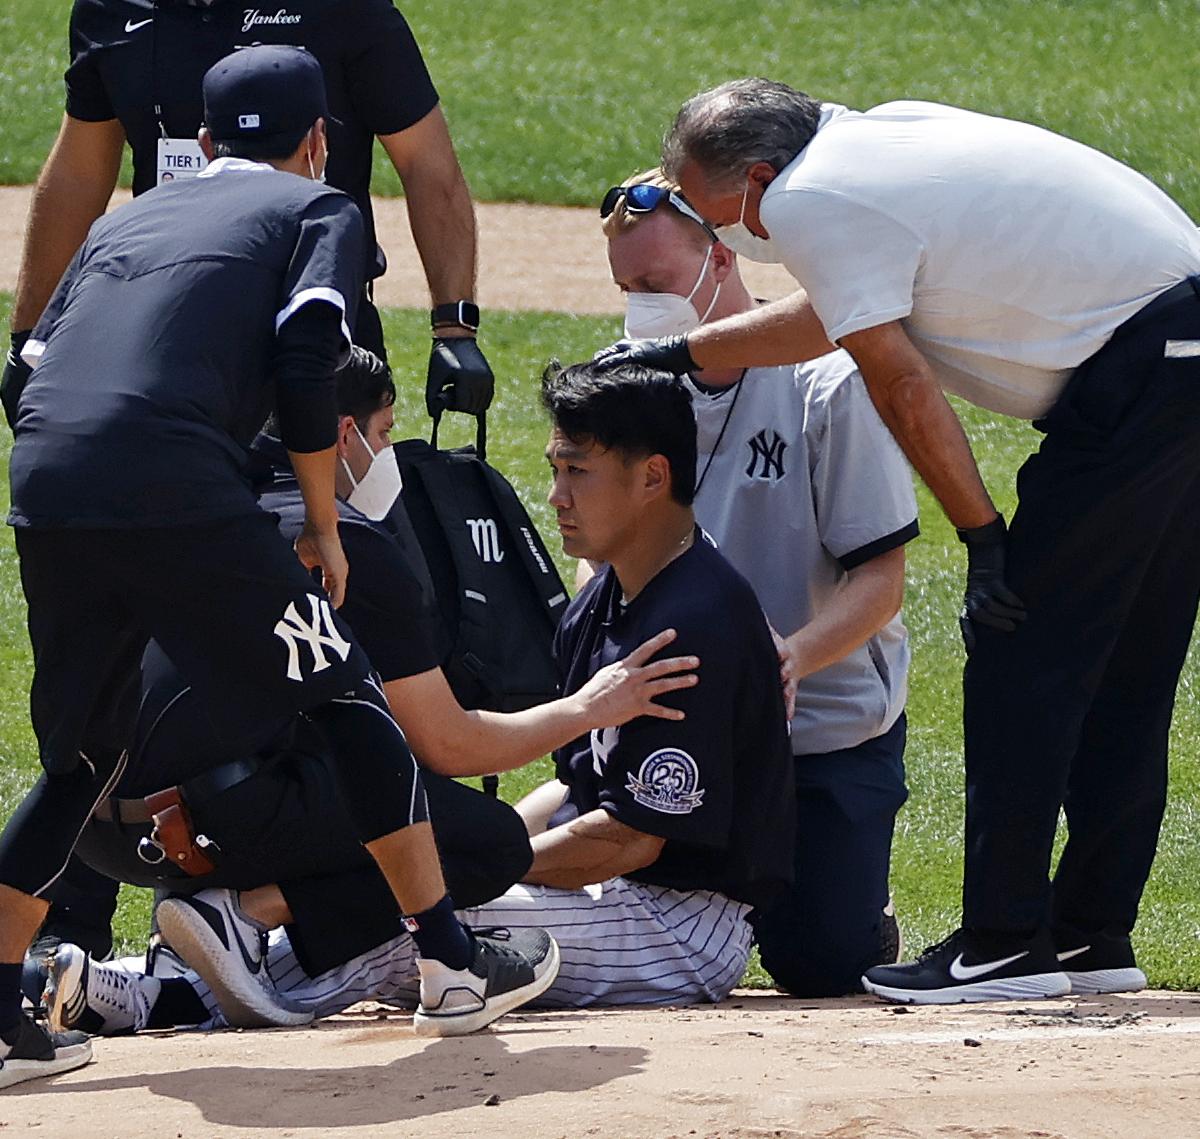 Yankees’ Masahiro Tanaka Diagnosed with Tender Concussion After Being Hit by Liner